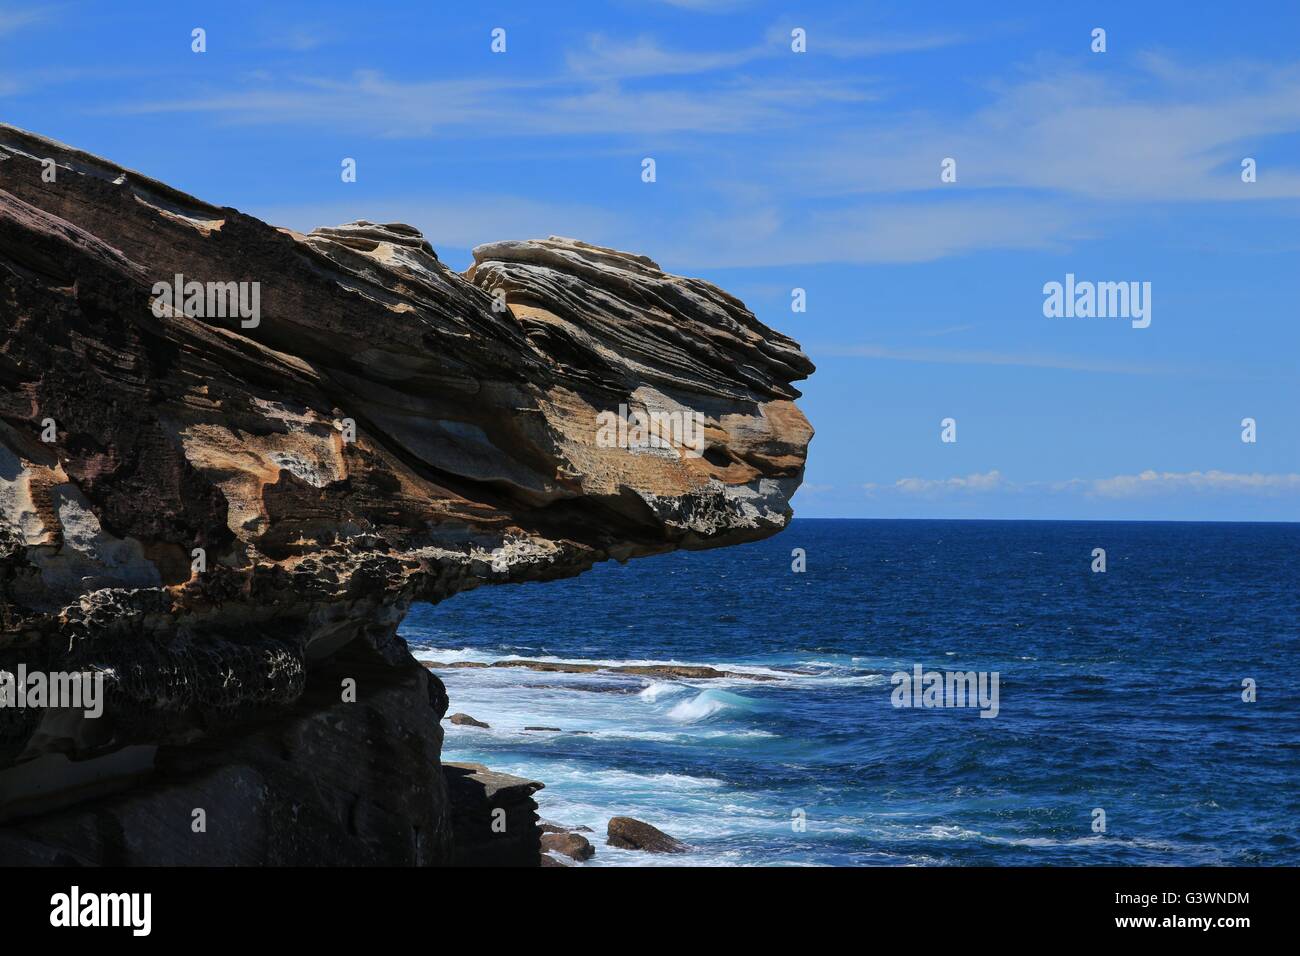 Rock shaped by wind and weather. Pacific coast. Stock Photo